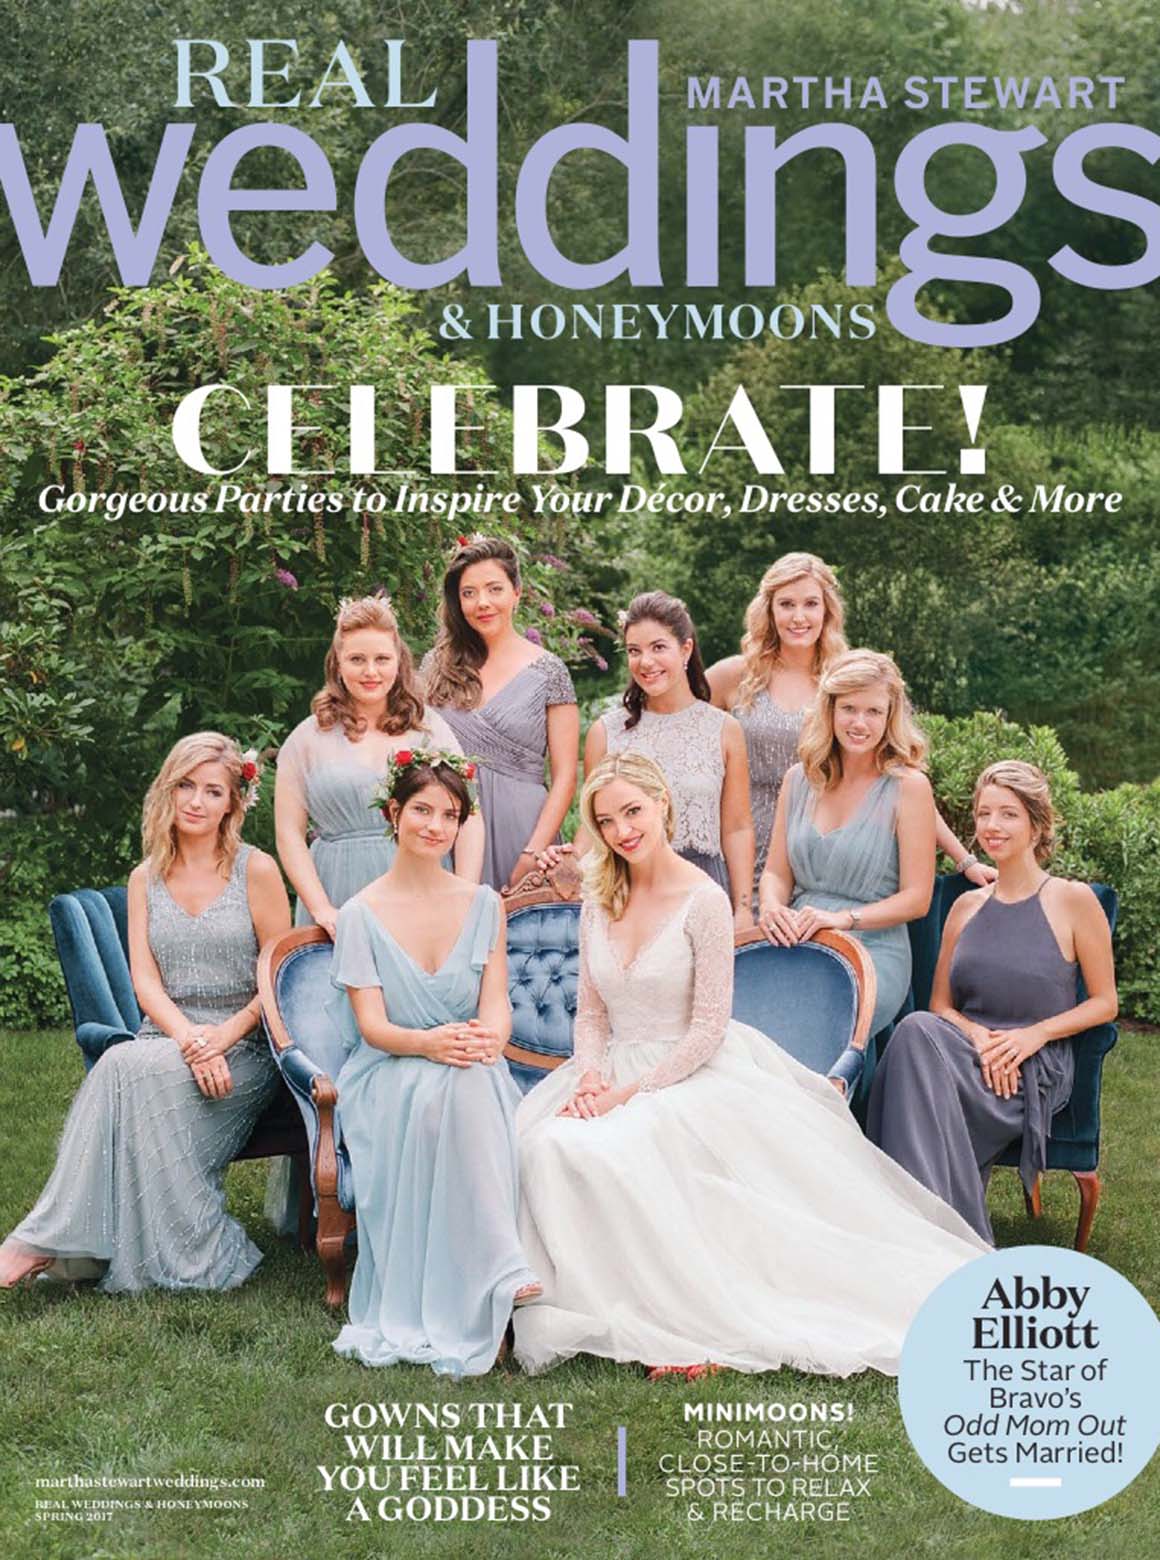 Cover of Martha Stewart Weddings spring 2017 titled "Celebrate! Gorgeous parties to inspire your decor, dresses, cake and more." The cover features a bride and eight bridesmaids in tones of blue and light purple posed outside on blue velvet antique furniture with a garden backdrop.